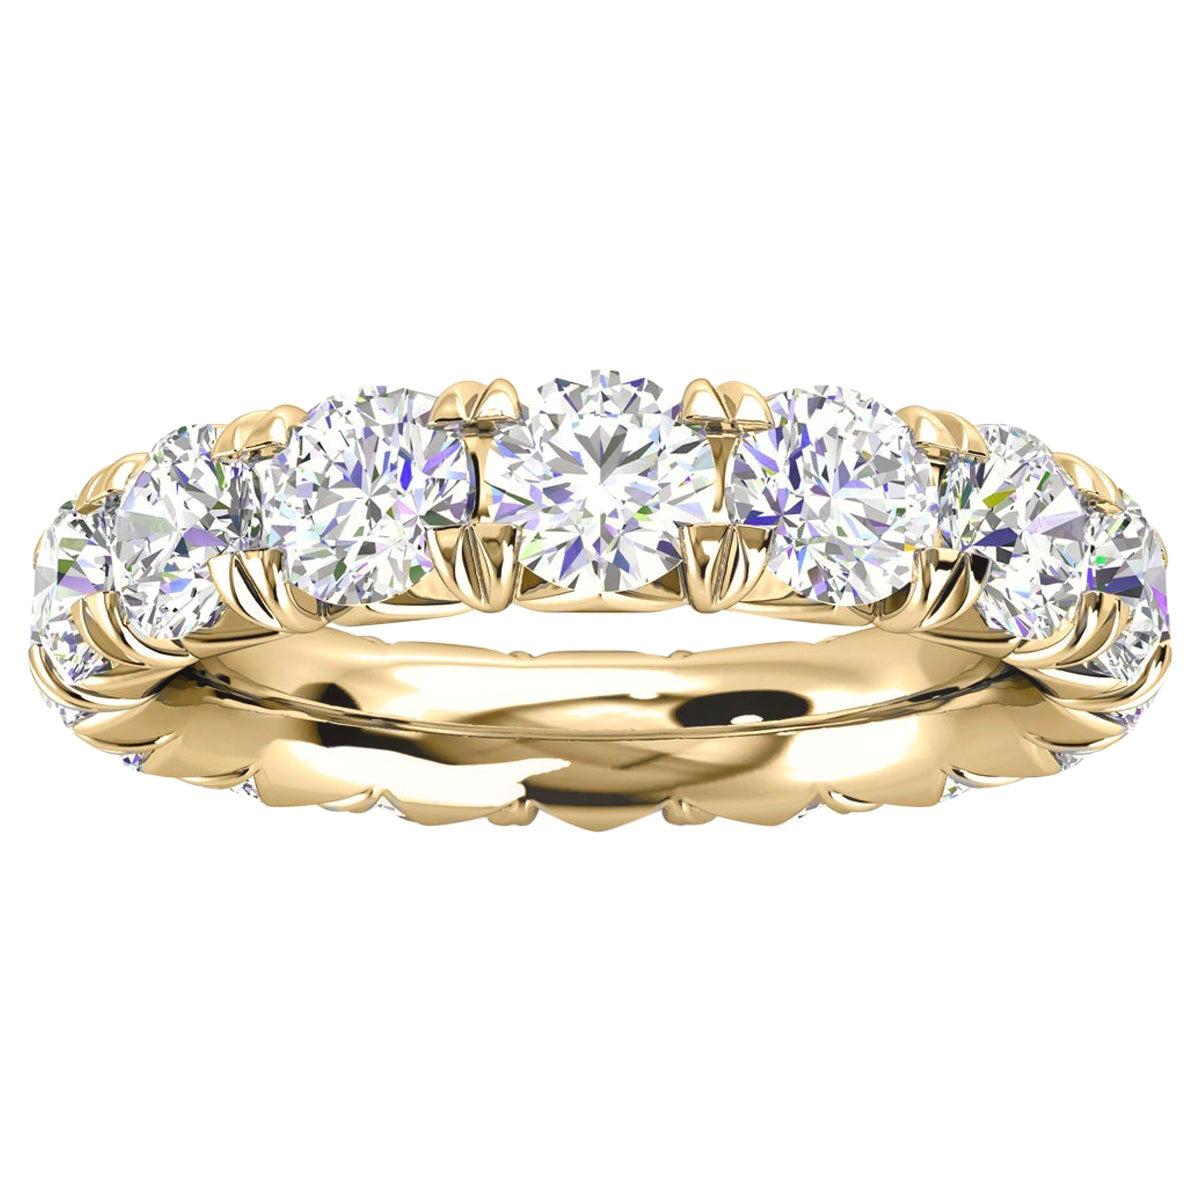 For Sale:  18k Yellow Gold Mia French Pave Diamond Eternity Ring '4 Ct. tw'